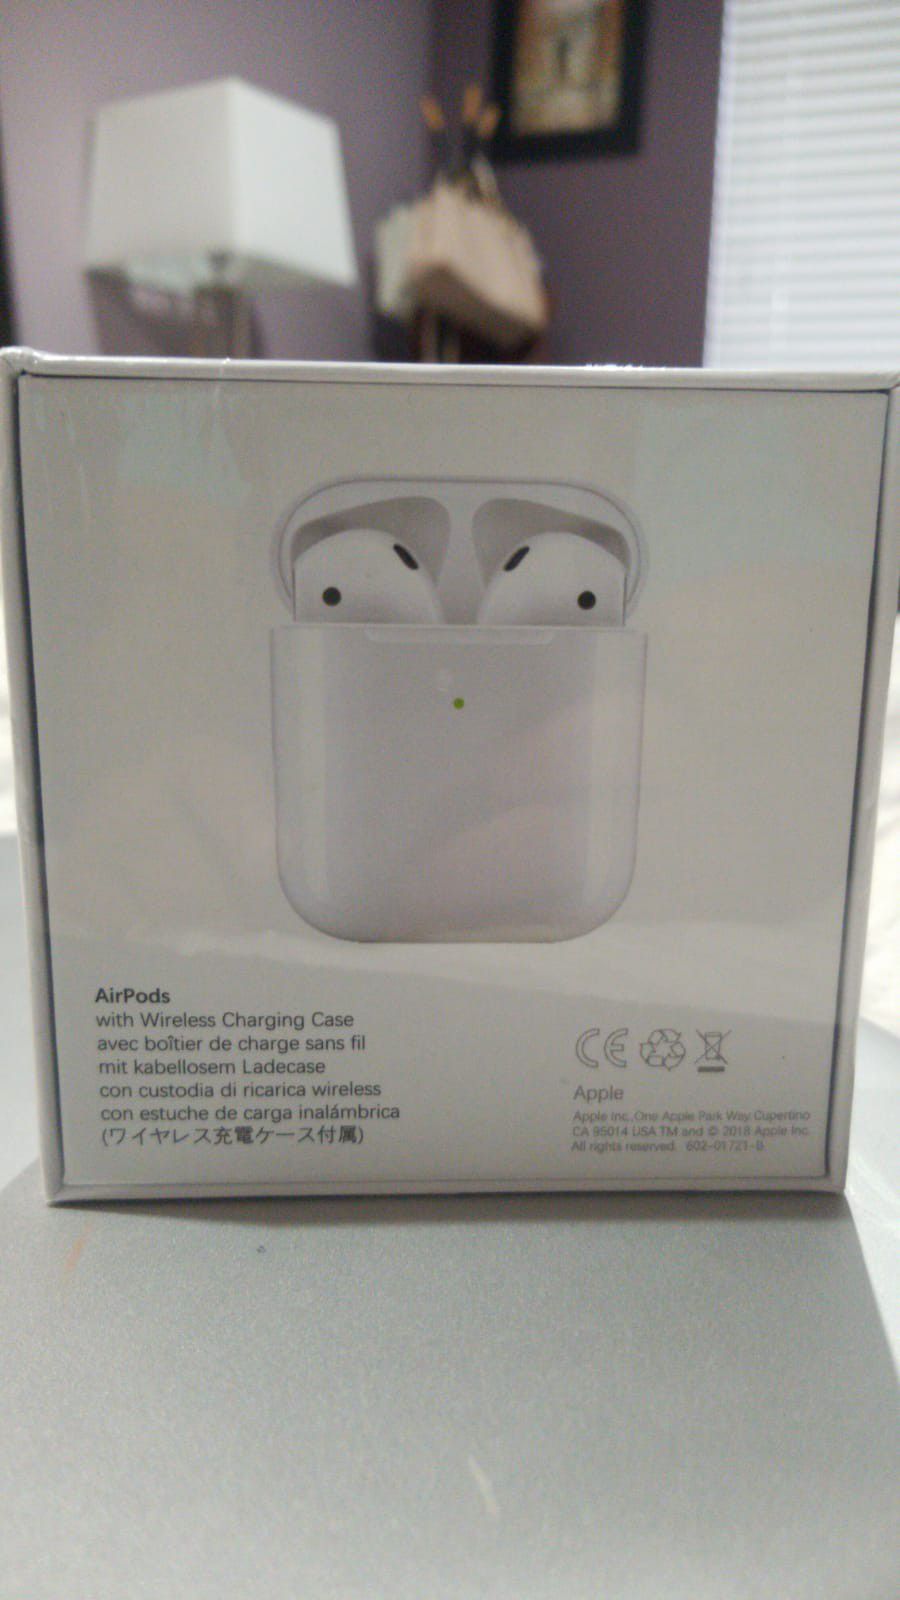 Airpod 2nd generation . Super copy. BRAND NEW. SEALED